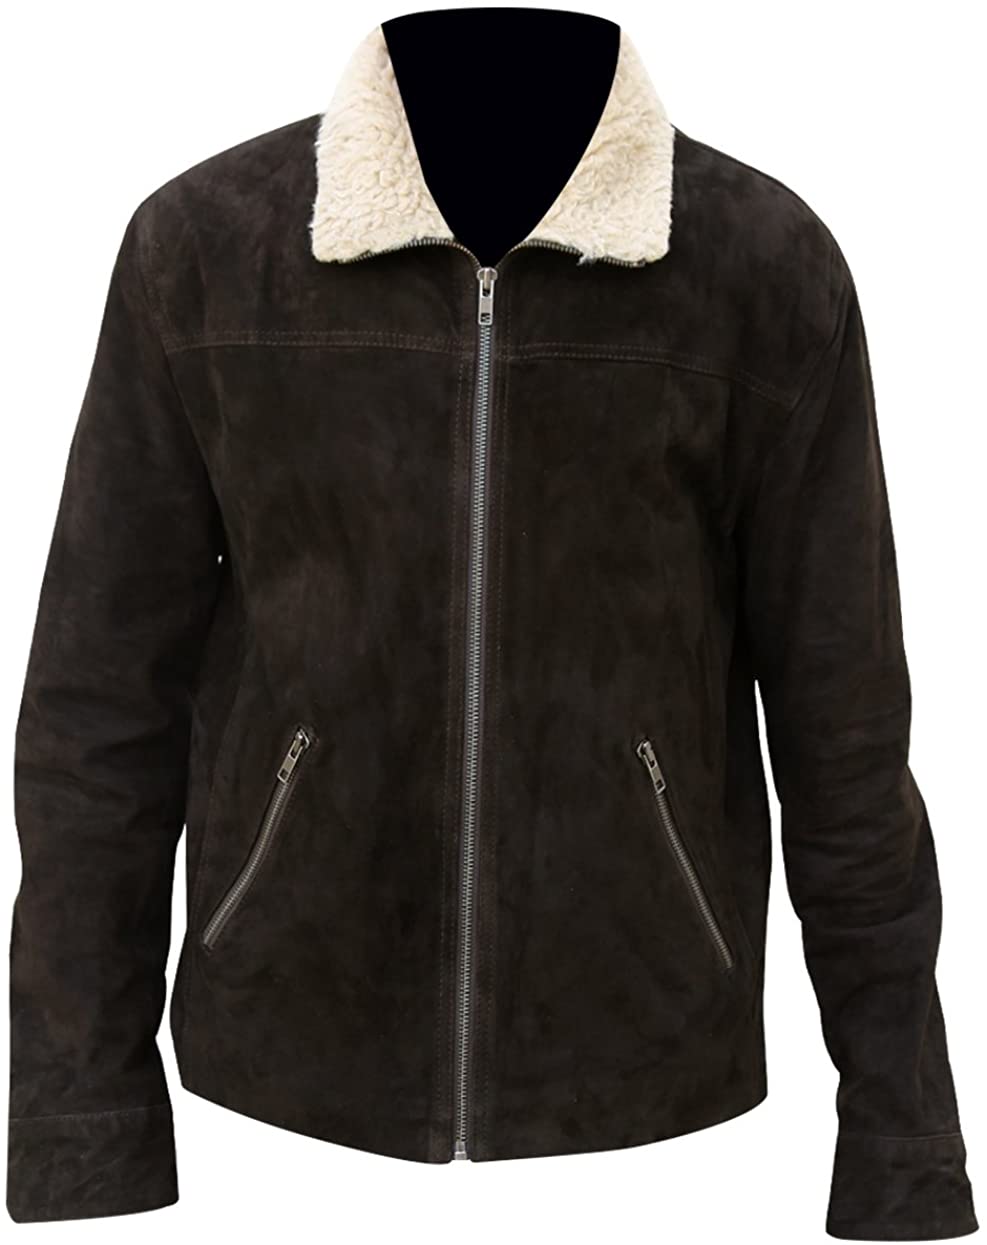 The Walking Dead Andrew Lincoln Season 5 Leather Jacket - A2 Jackets